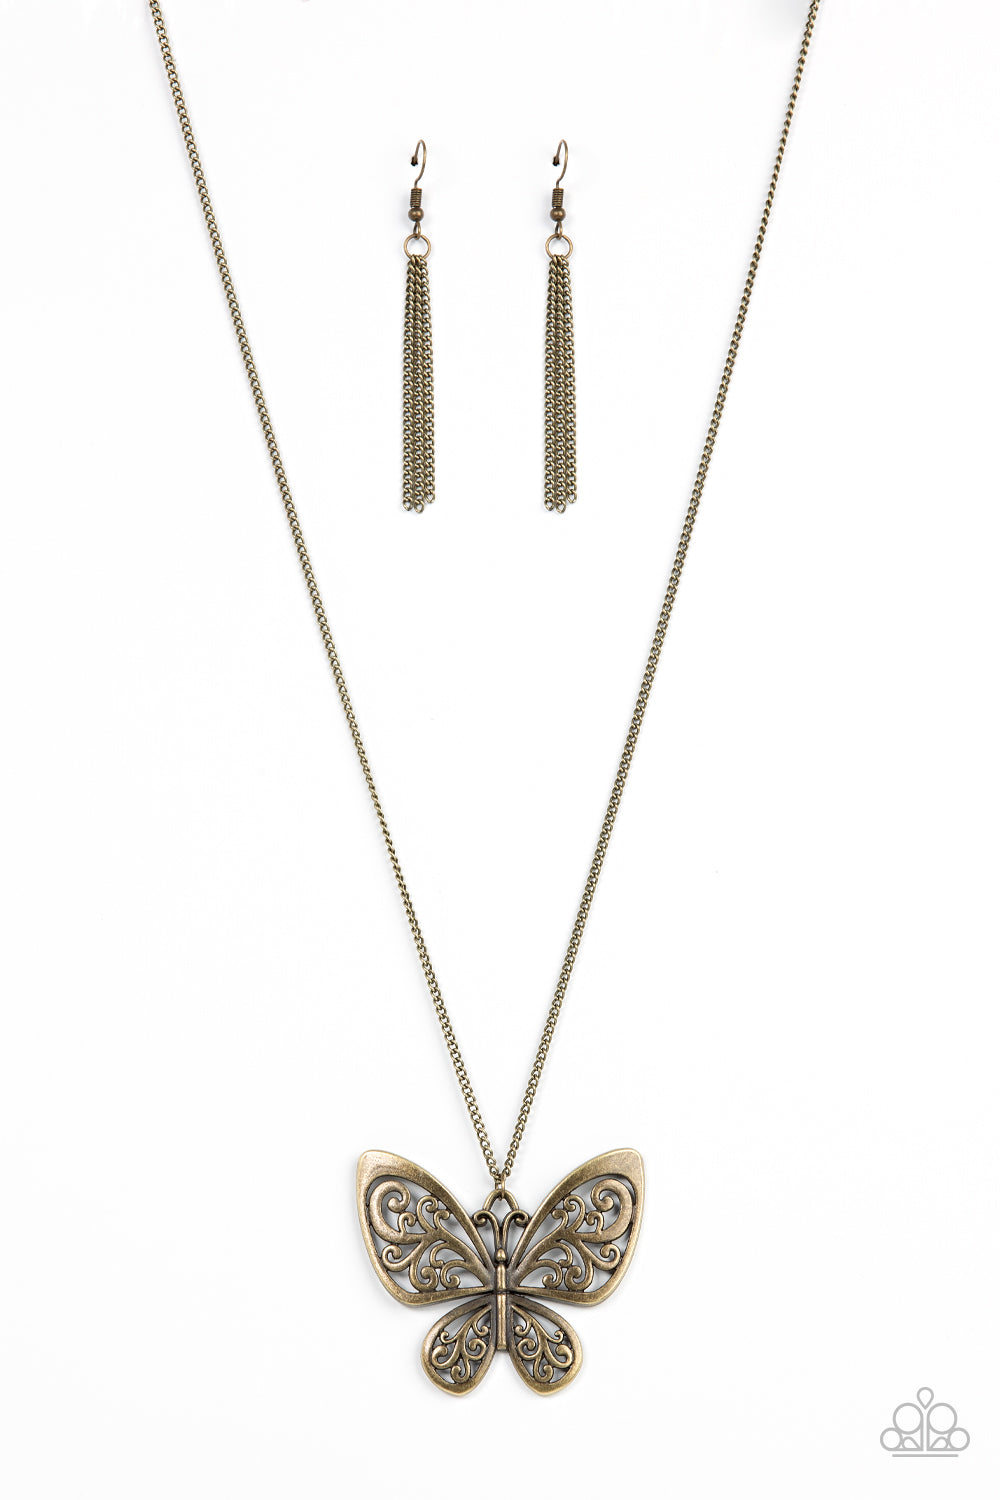 Butterfly Boutique Brass Necklace - Paparazzi Accessories  Filled with frilly filigree details, a rustic brass butterfly flutters from the bottom of an extended brass chain for a whimsical fashion. Features an adjustable clasp closure.  Sold as one individual necklace. Includes one pair of matching earrings.